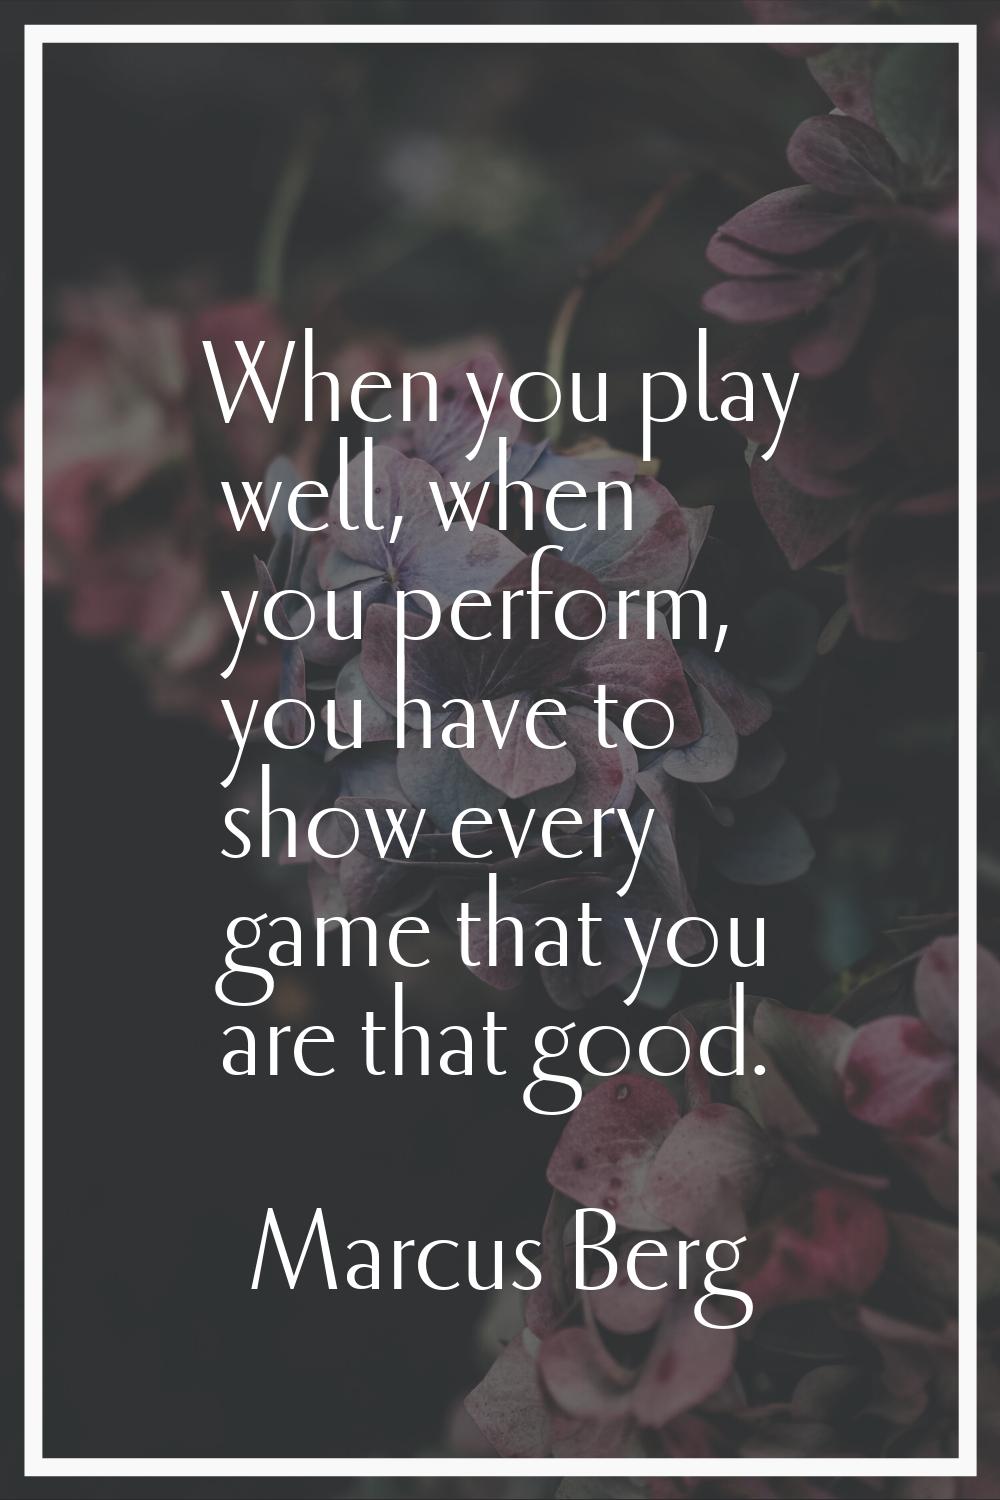 When you play well, when you perform, you have to show every game that you are that good.